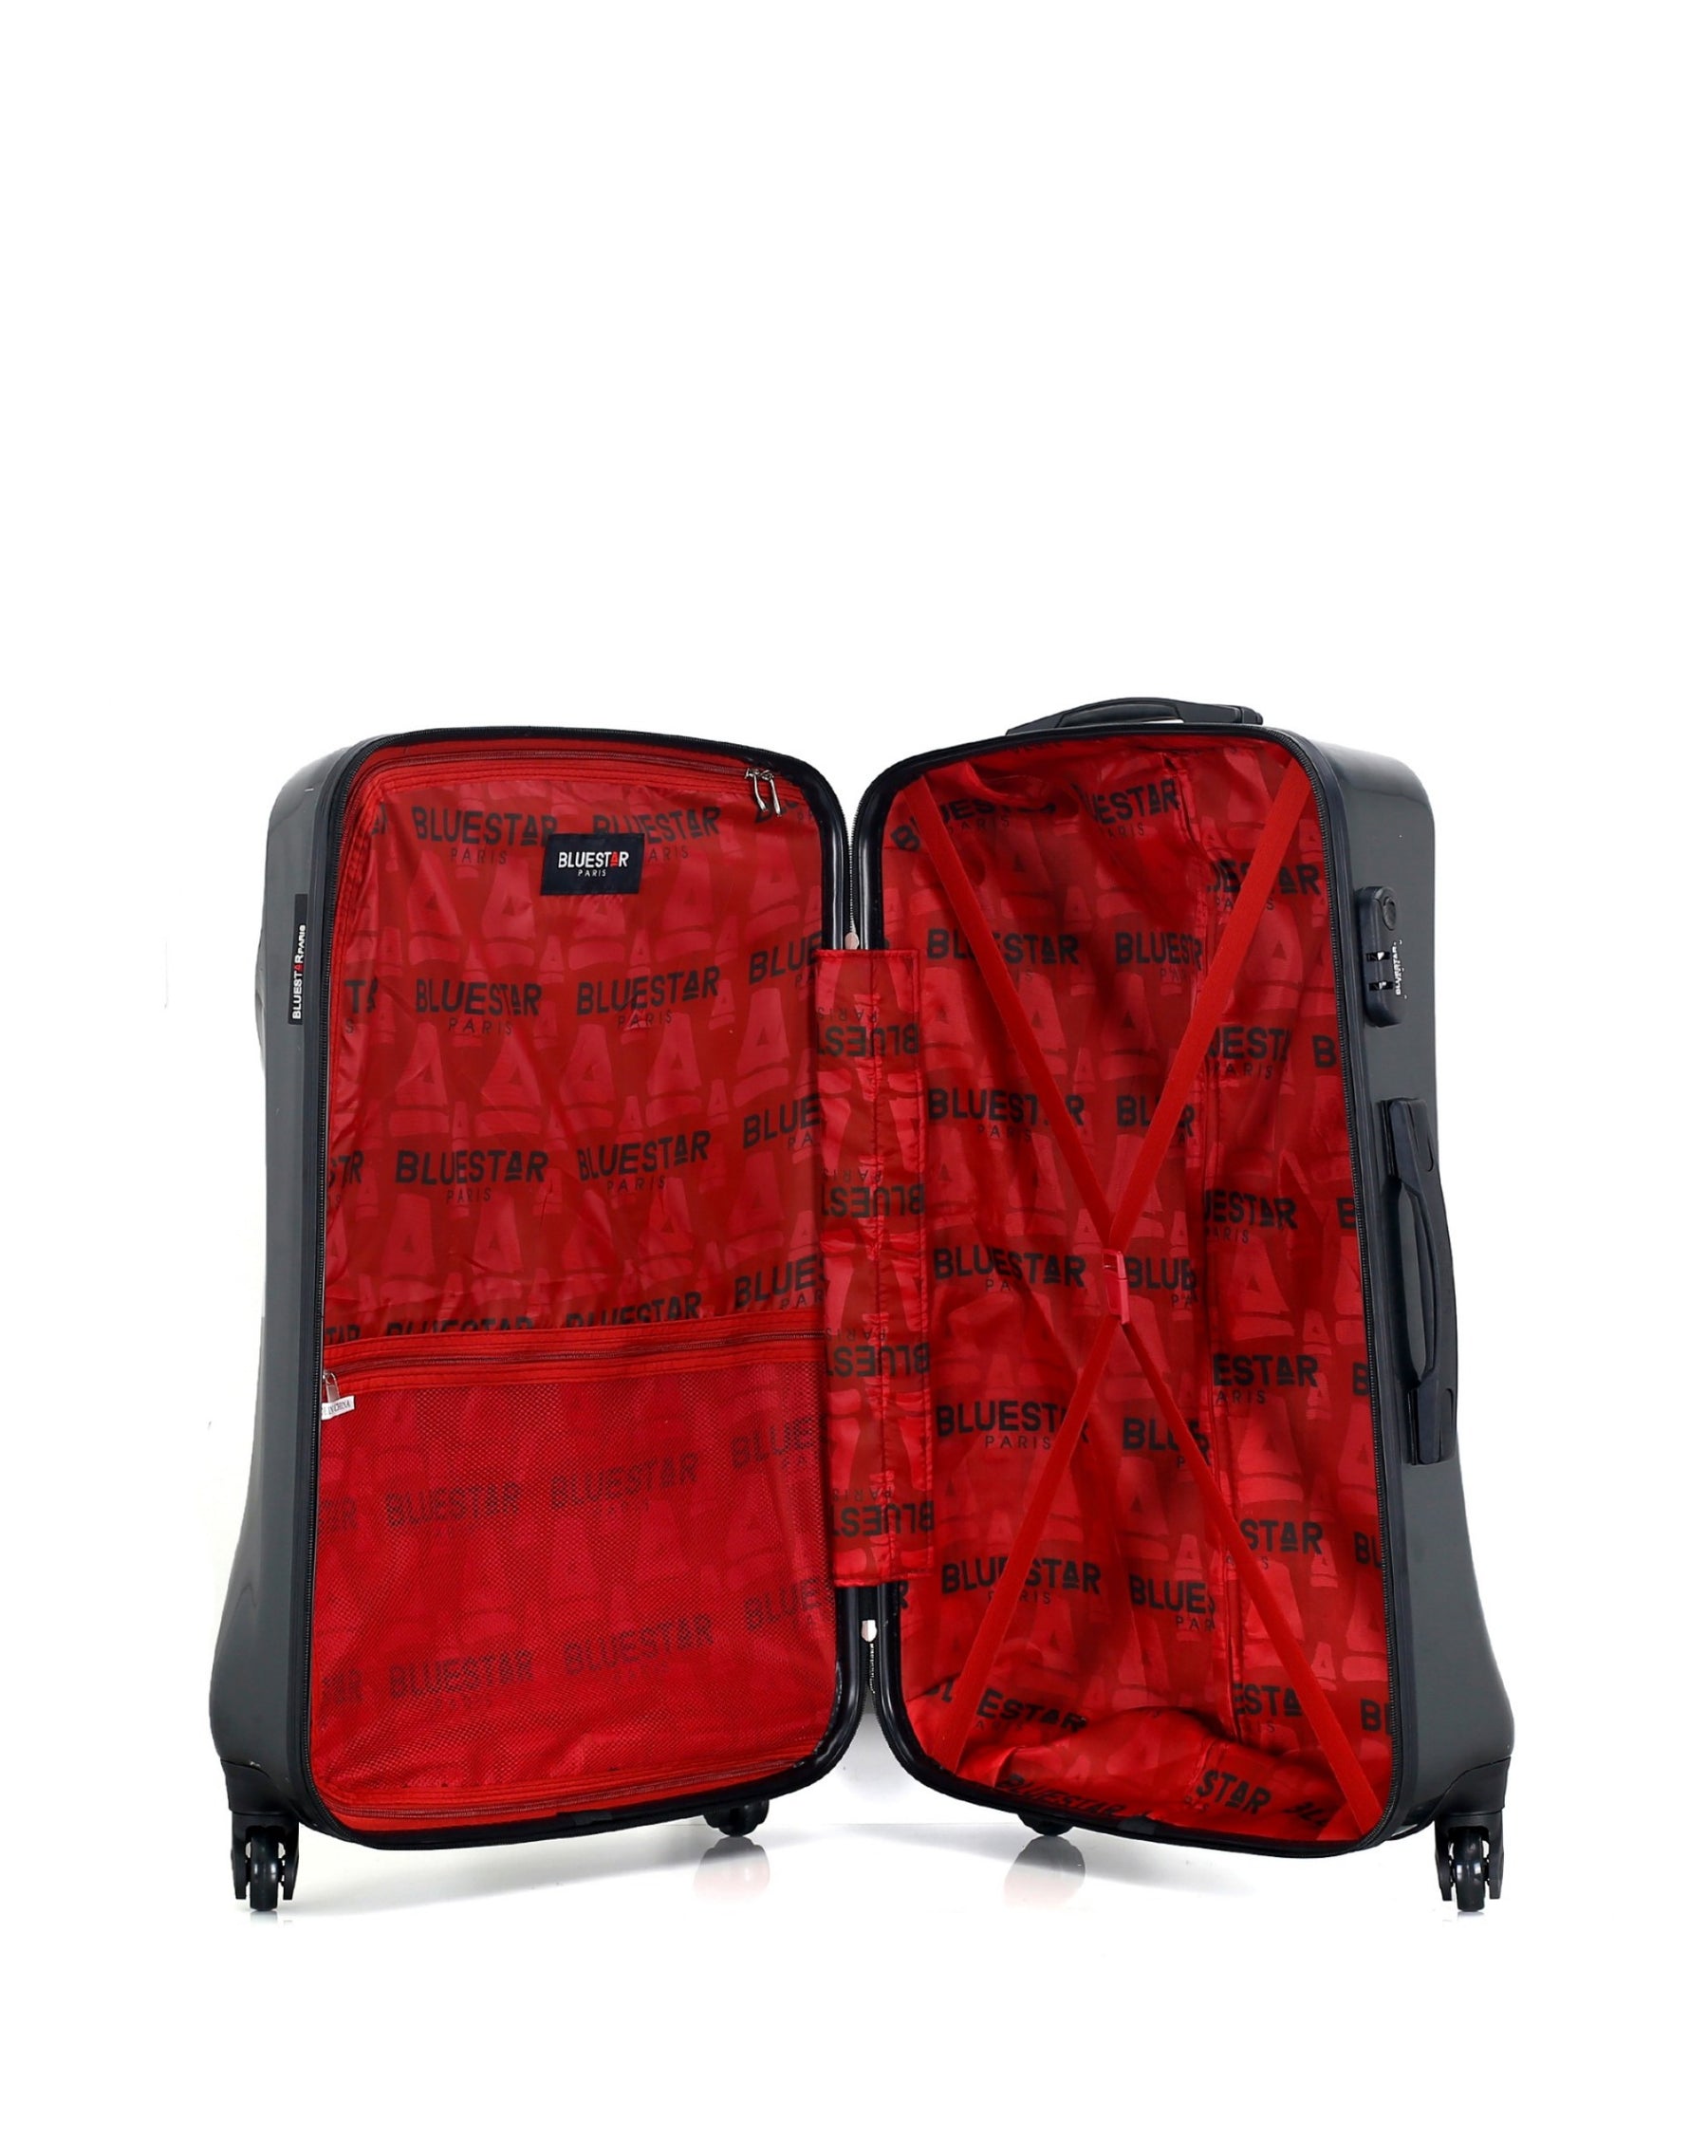 Valise DALLAS Taille moyenne 65cm